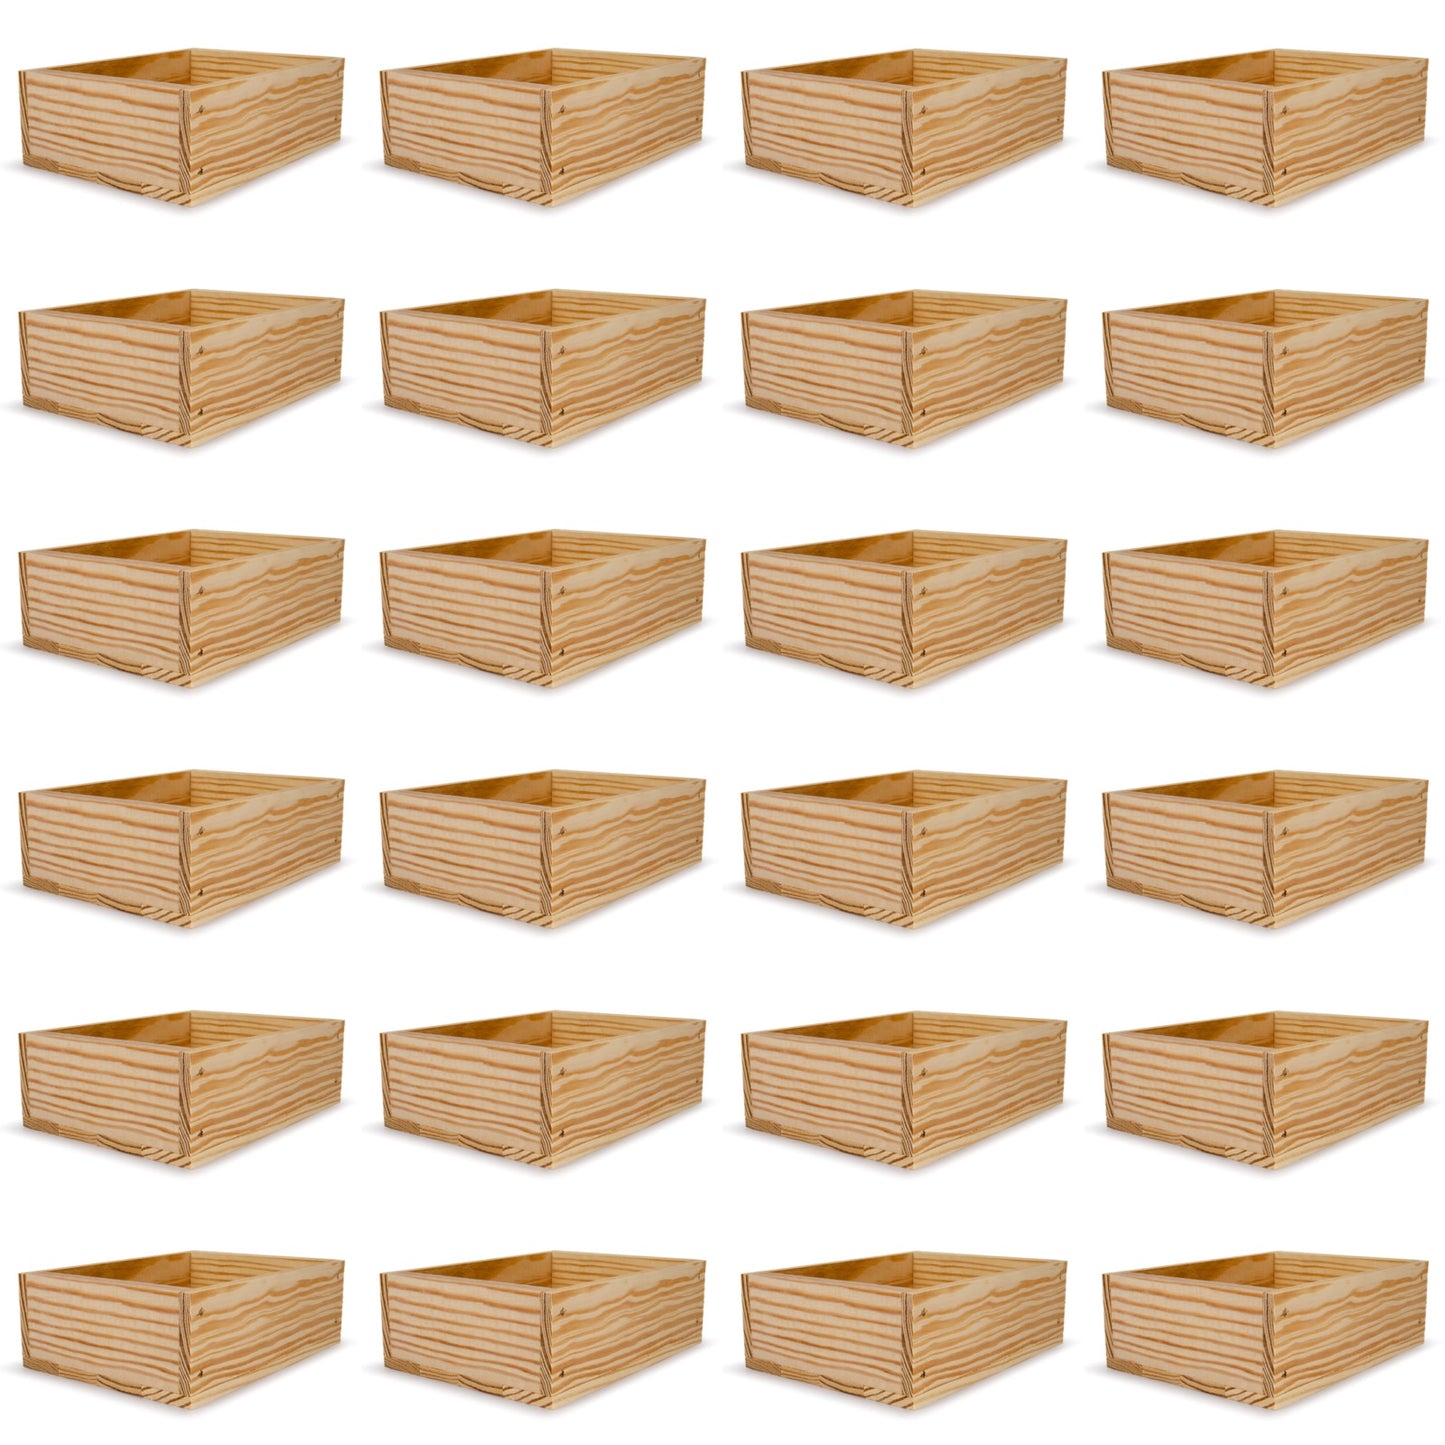 24 Small wooden crates 8x6.25x2.75